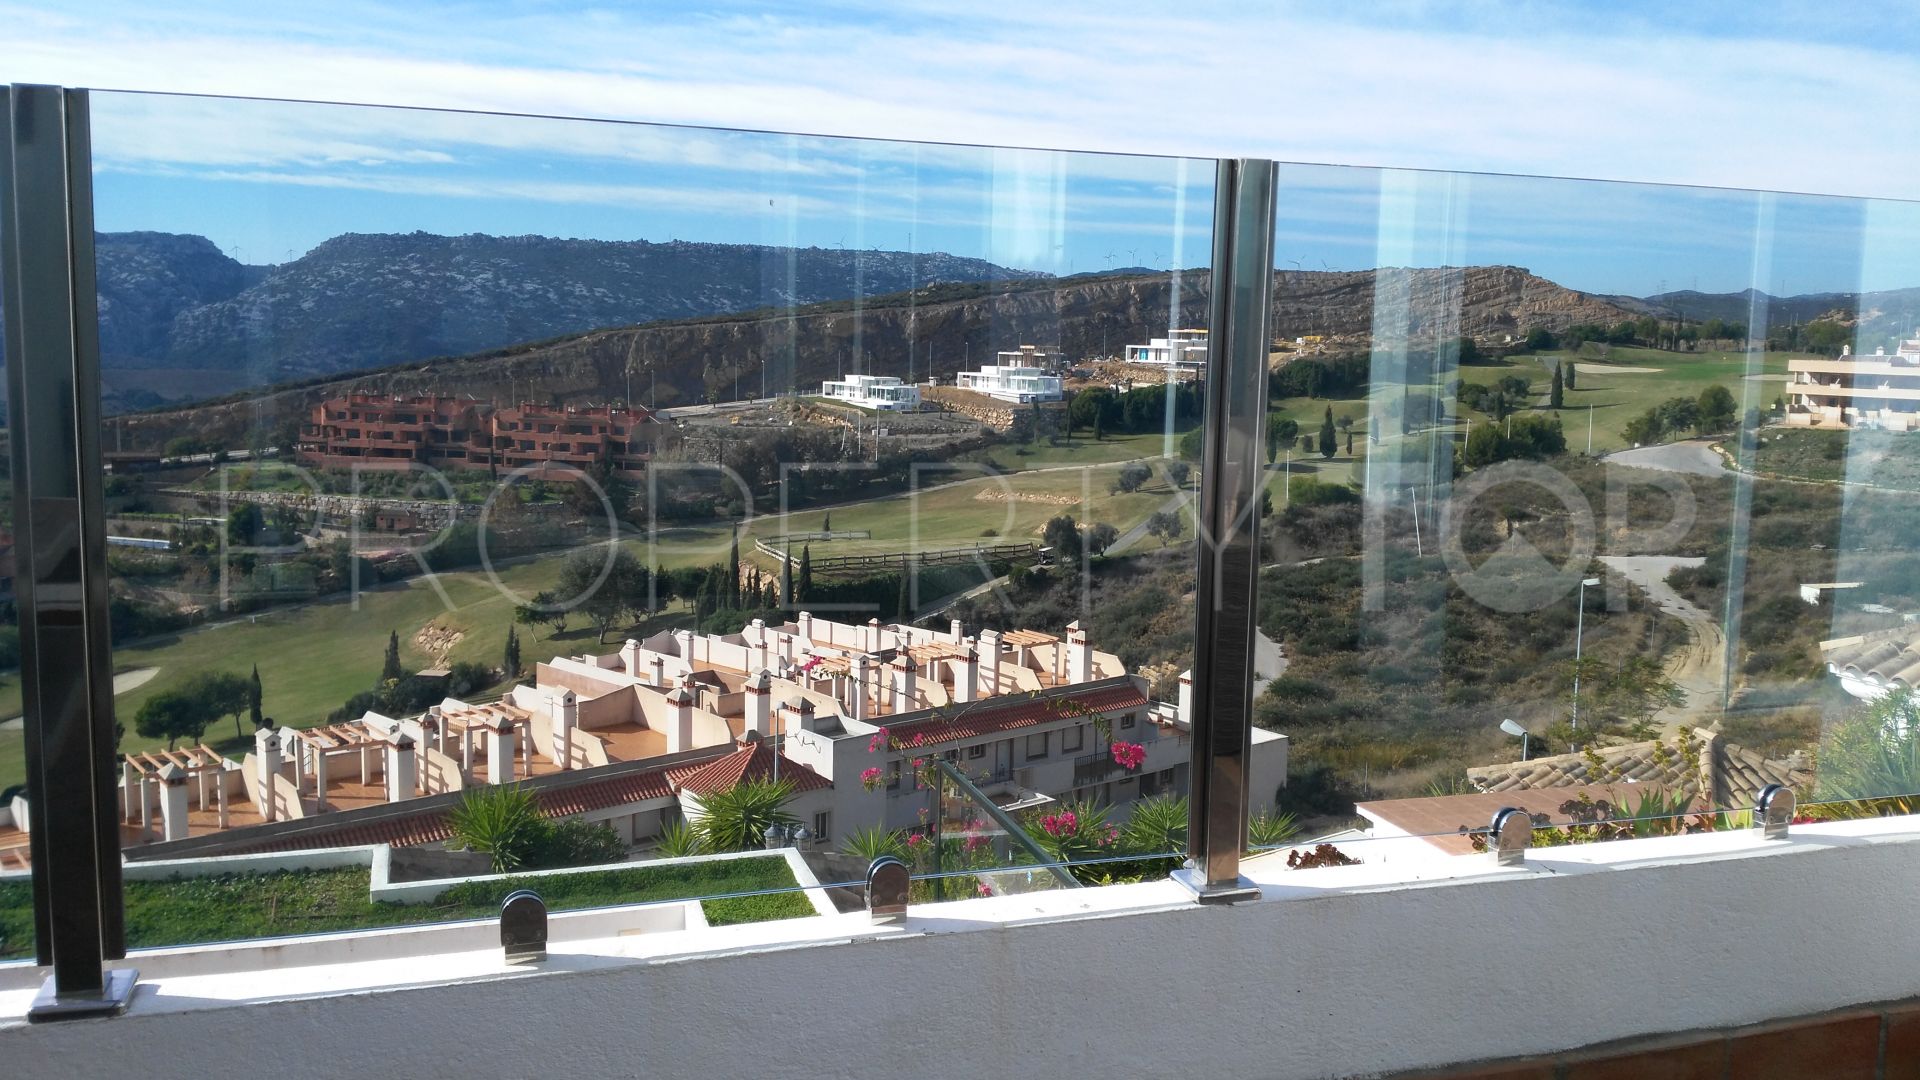 3 bedrooms Doña Julia penthouse for sale